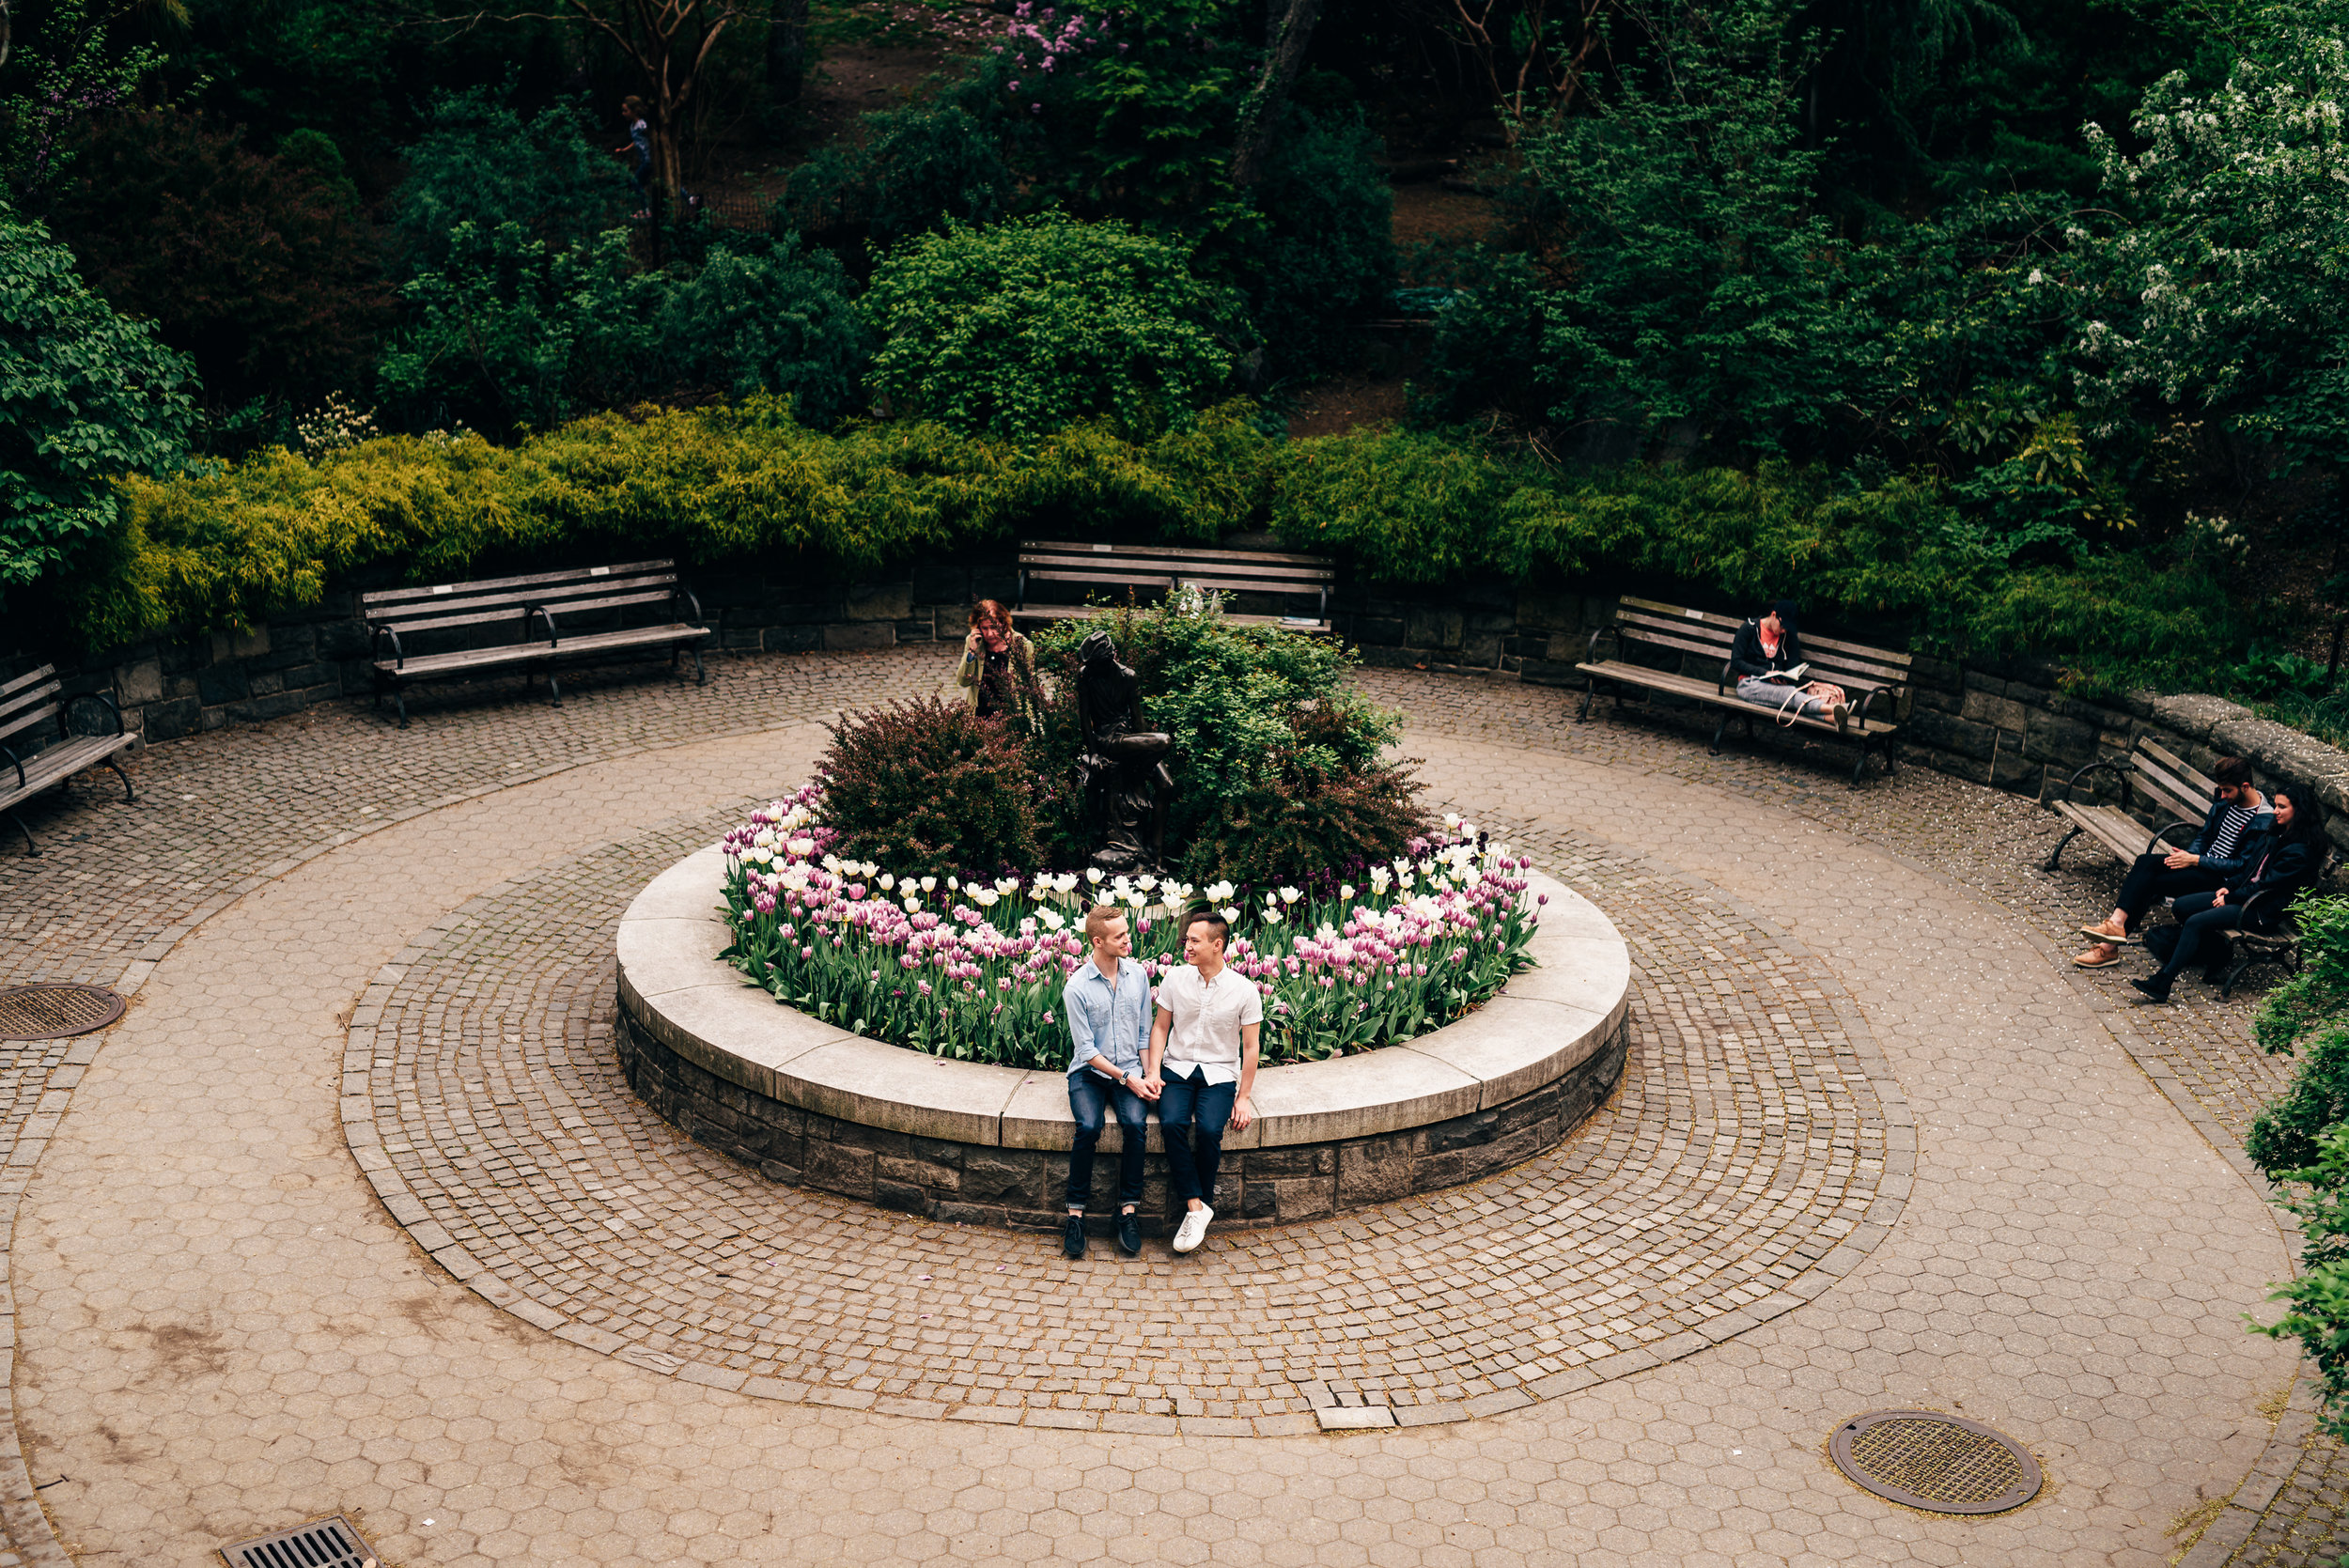  evan and lawrance enjoying a moment together at carl shurz park in the upper east side. I got to work with the two of them as I wanted to try out some new techniques with brenizer panoramas, as well as same sex engagement or couples photography 